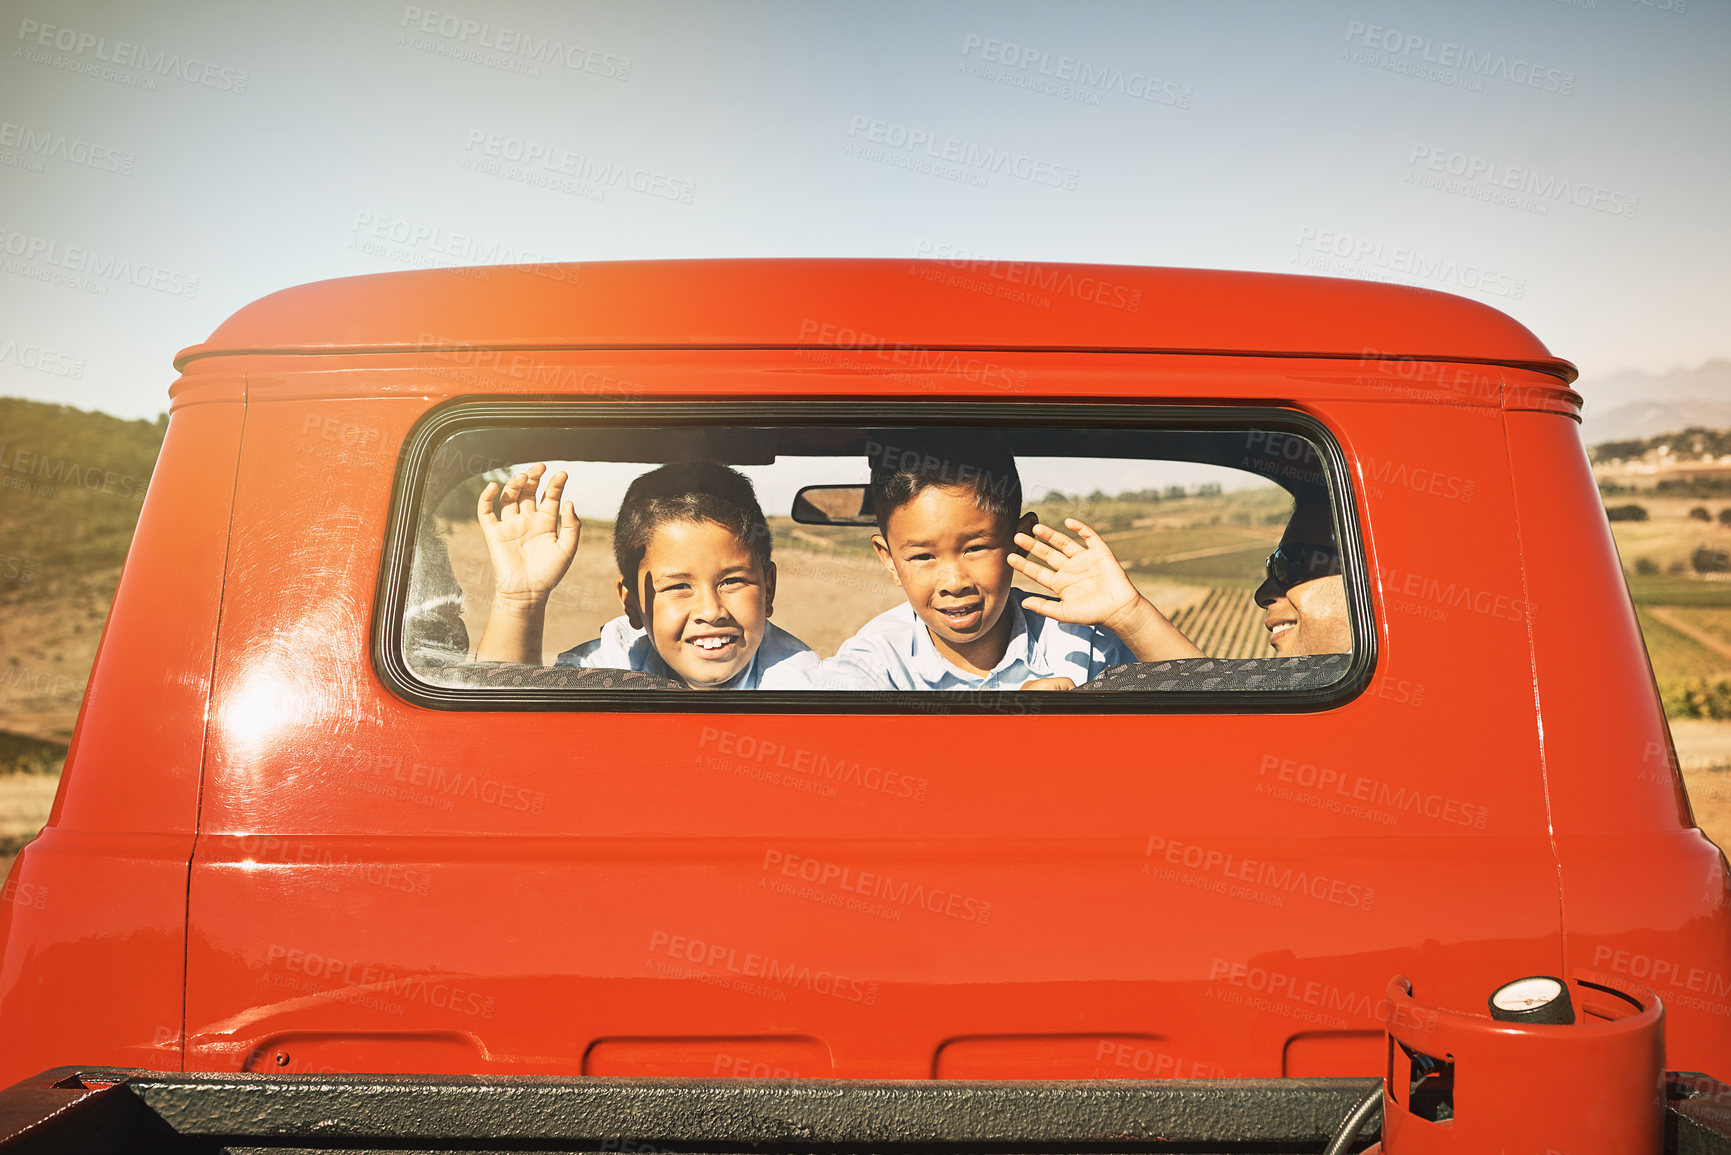 Buy stock photo Shot of two young cheerful boys smiling and waving from the back of a red pickup truck while looking into the camera